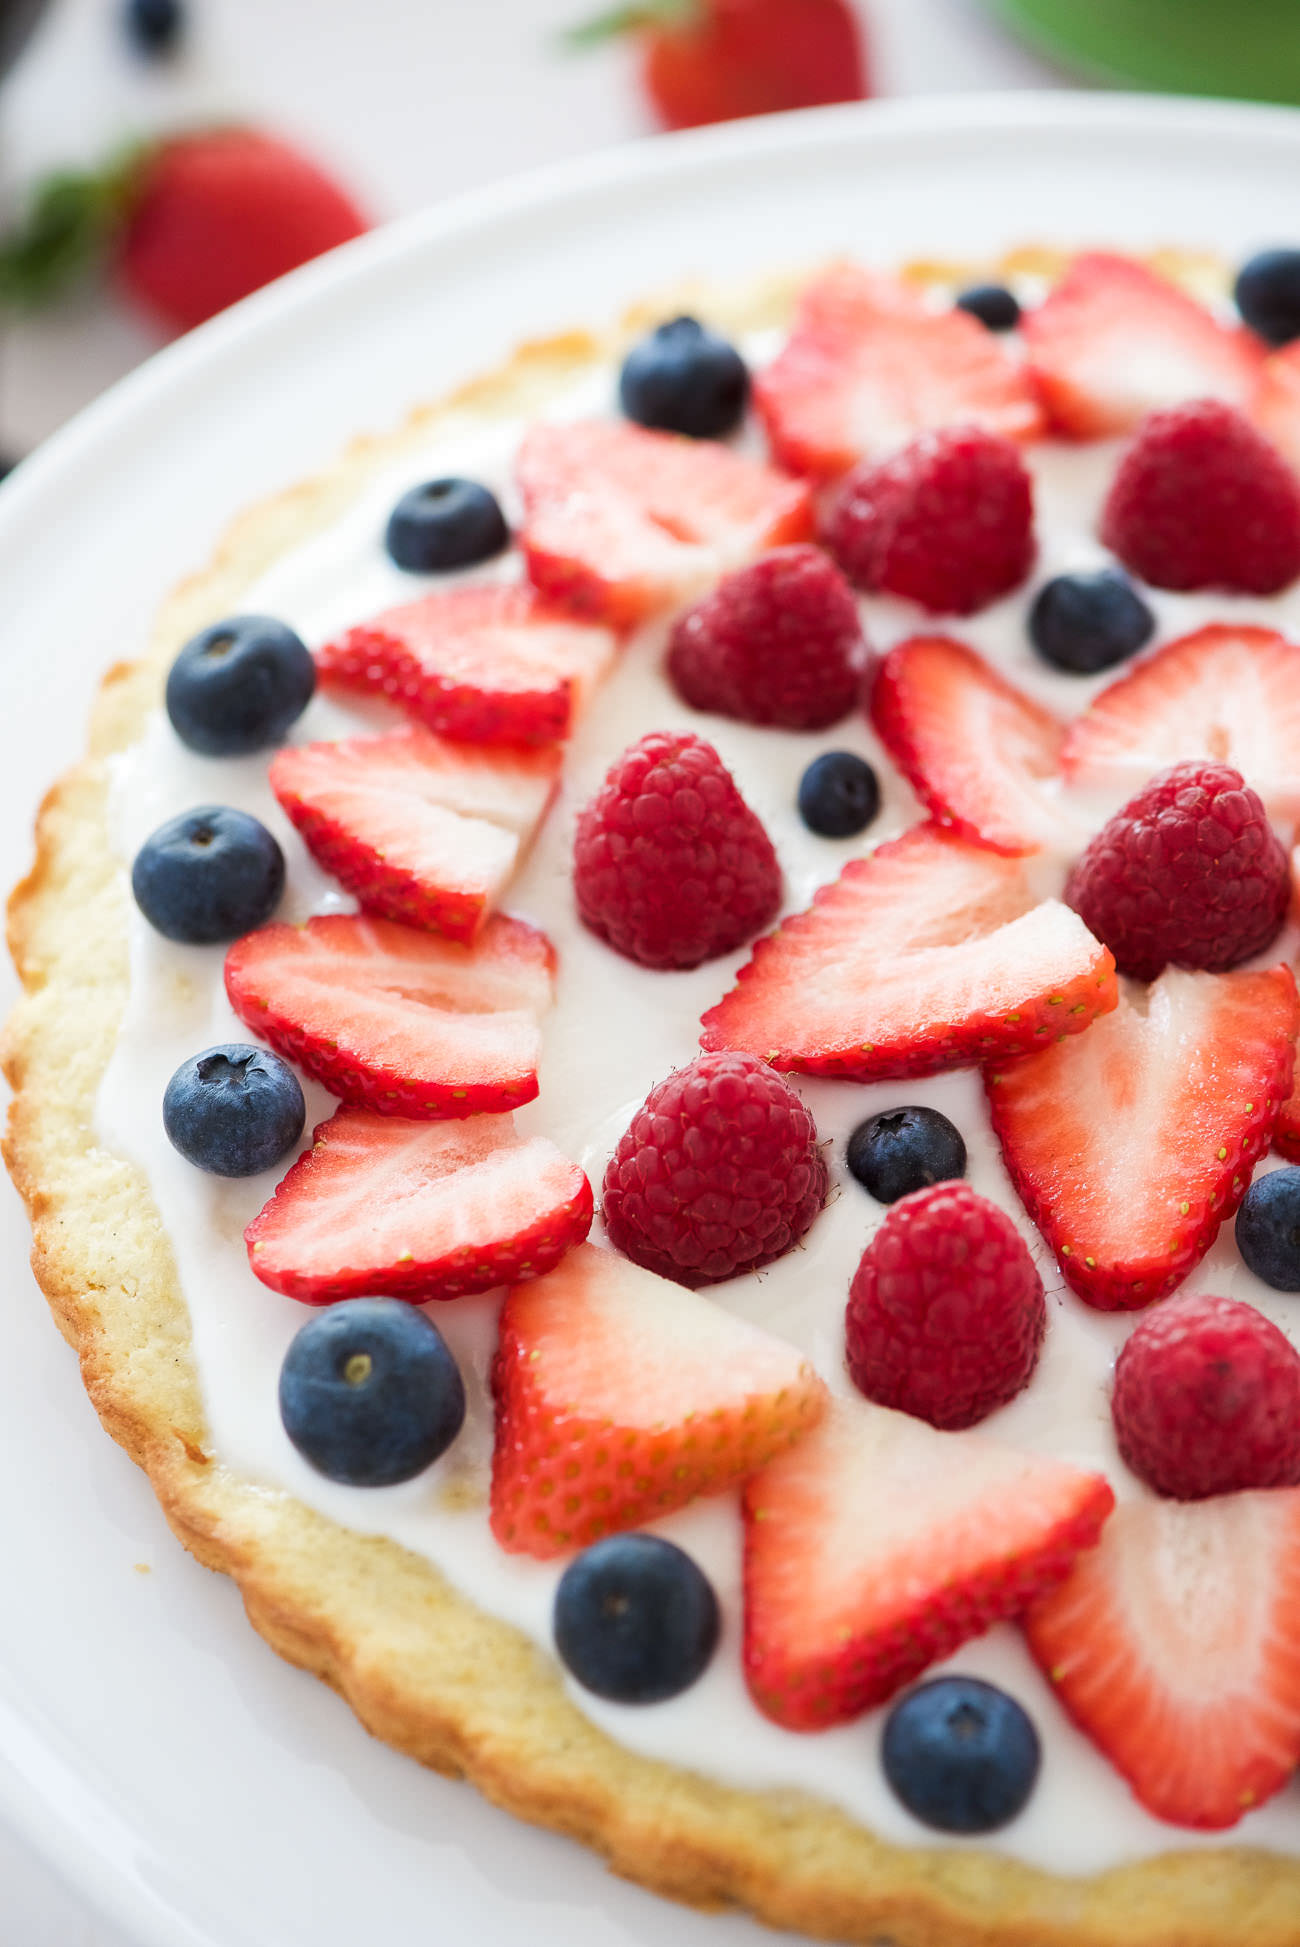 This Berry Tart with Lemon Cookie Crust has made all my spring dessert dreams come true! A citrus cookie crust topped with vanilla greek yogurt and fresh berries! The ideal and simple dessert to impress any guest!